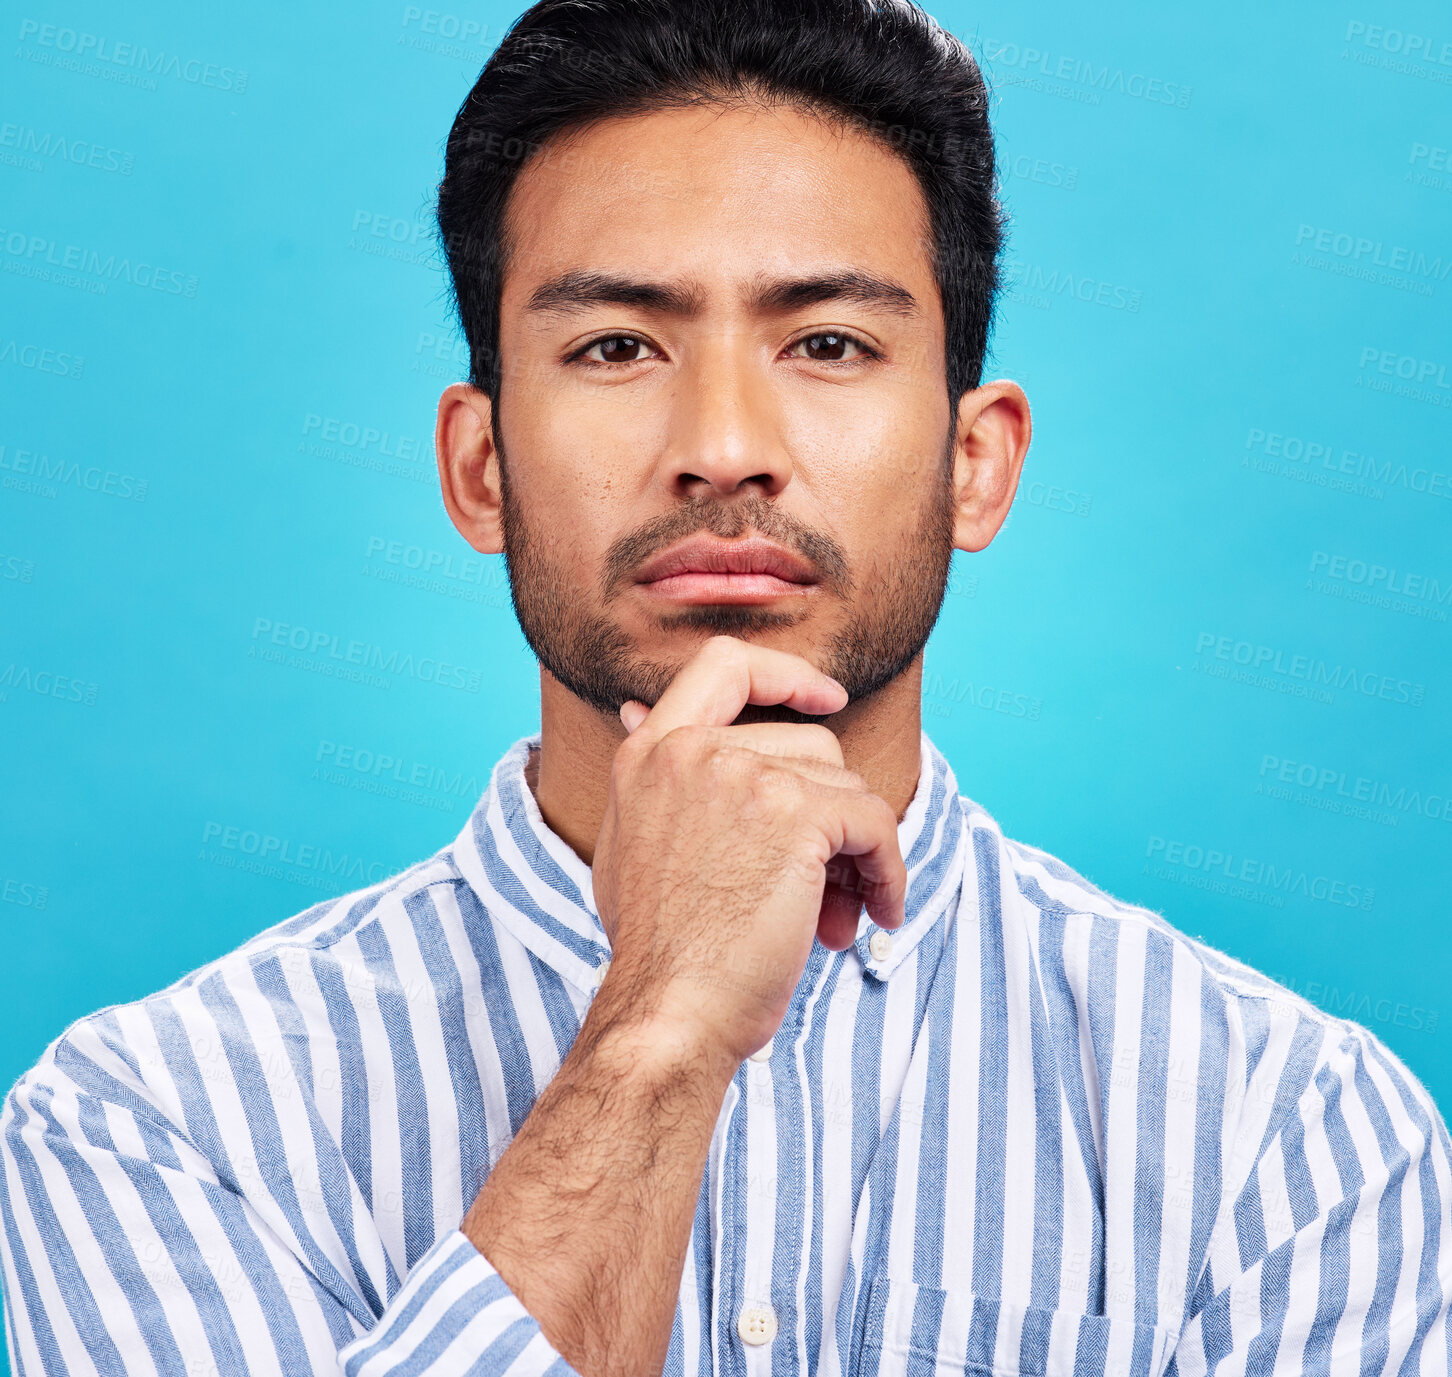 Buy stock photo Portrait of man on blue background, thinking and serious expression and hand on face isolated on studio backdrop. Confidence, mockup space and professional male model with pride and vision for future